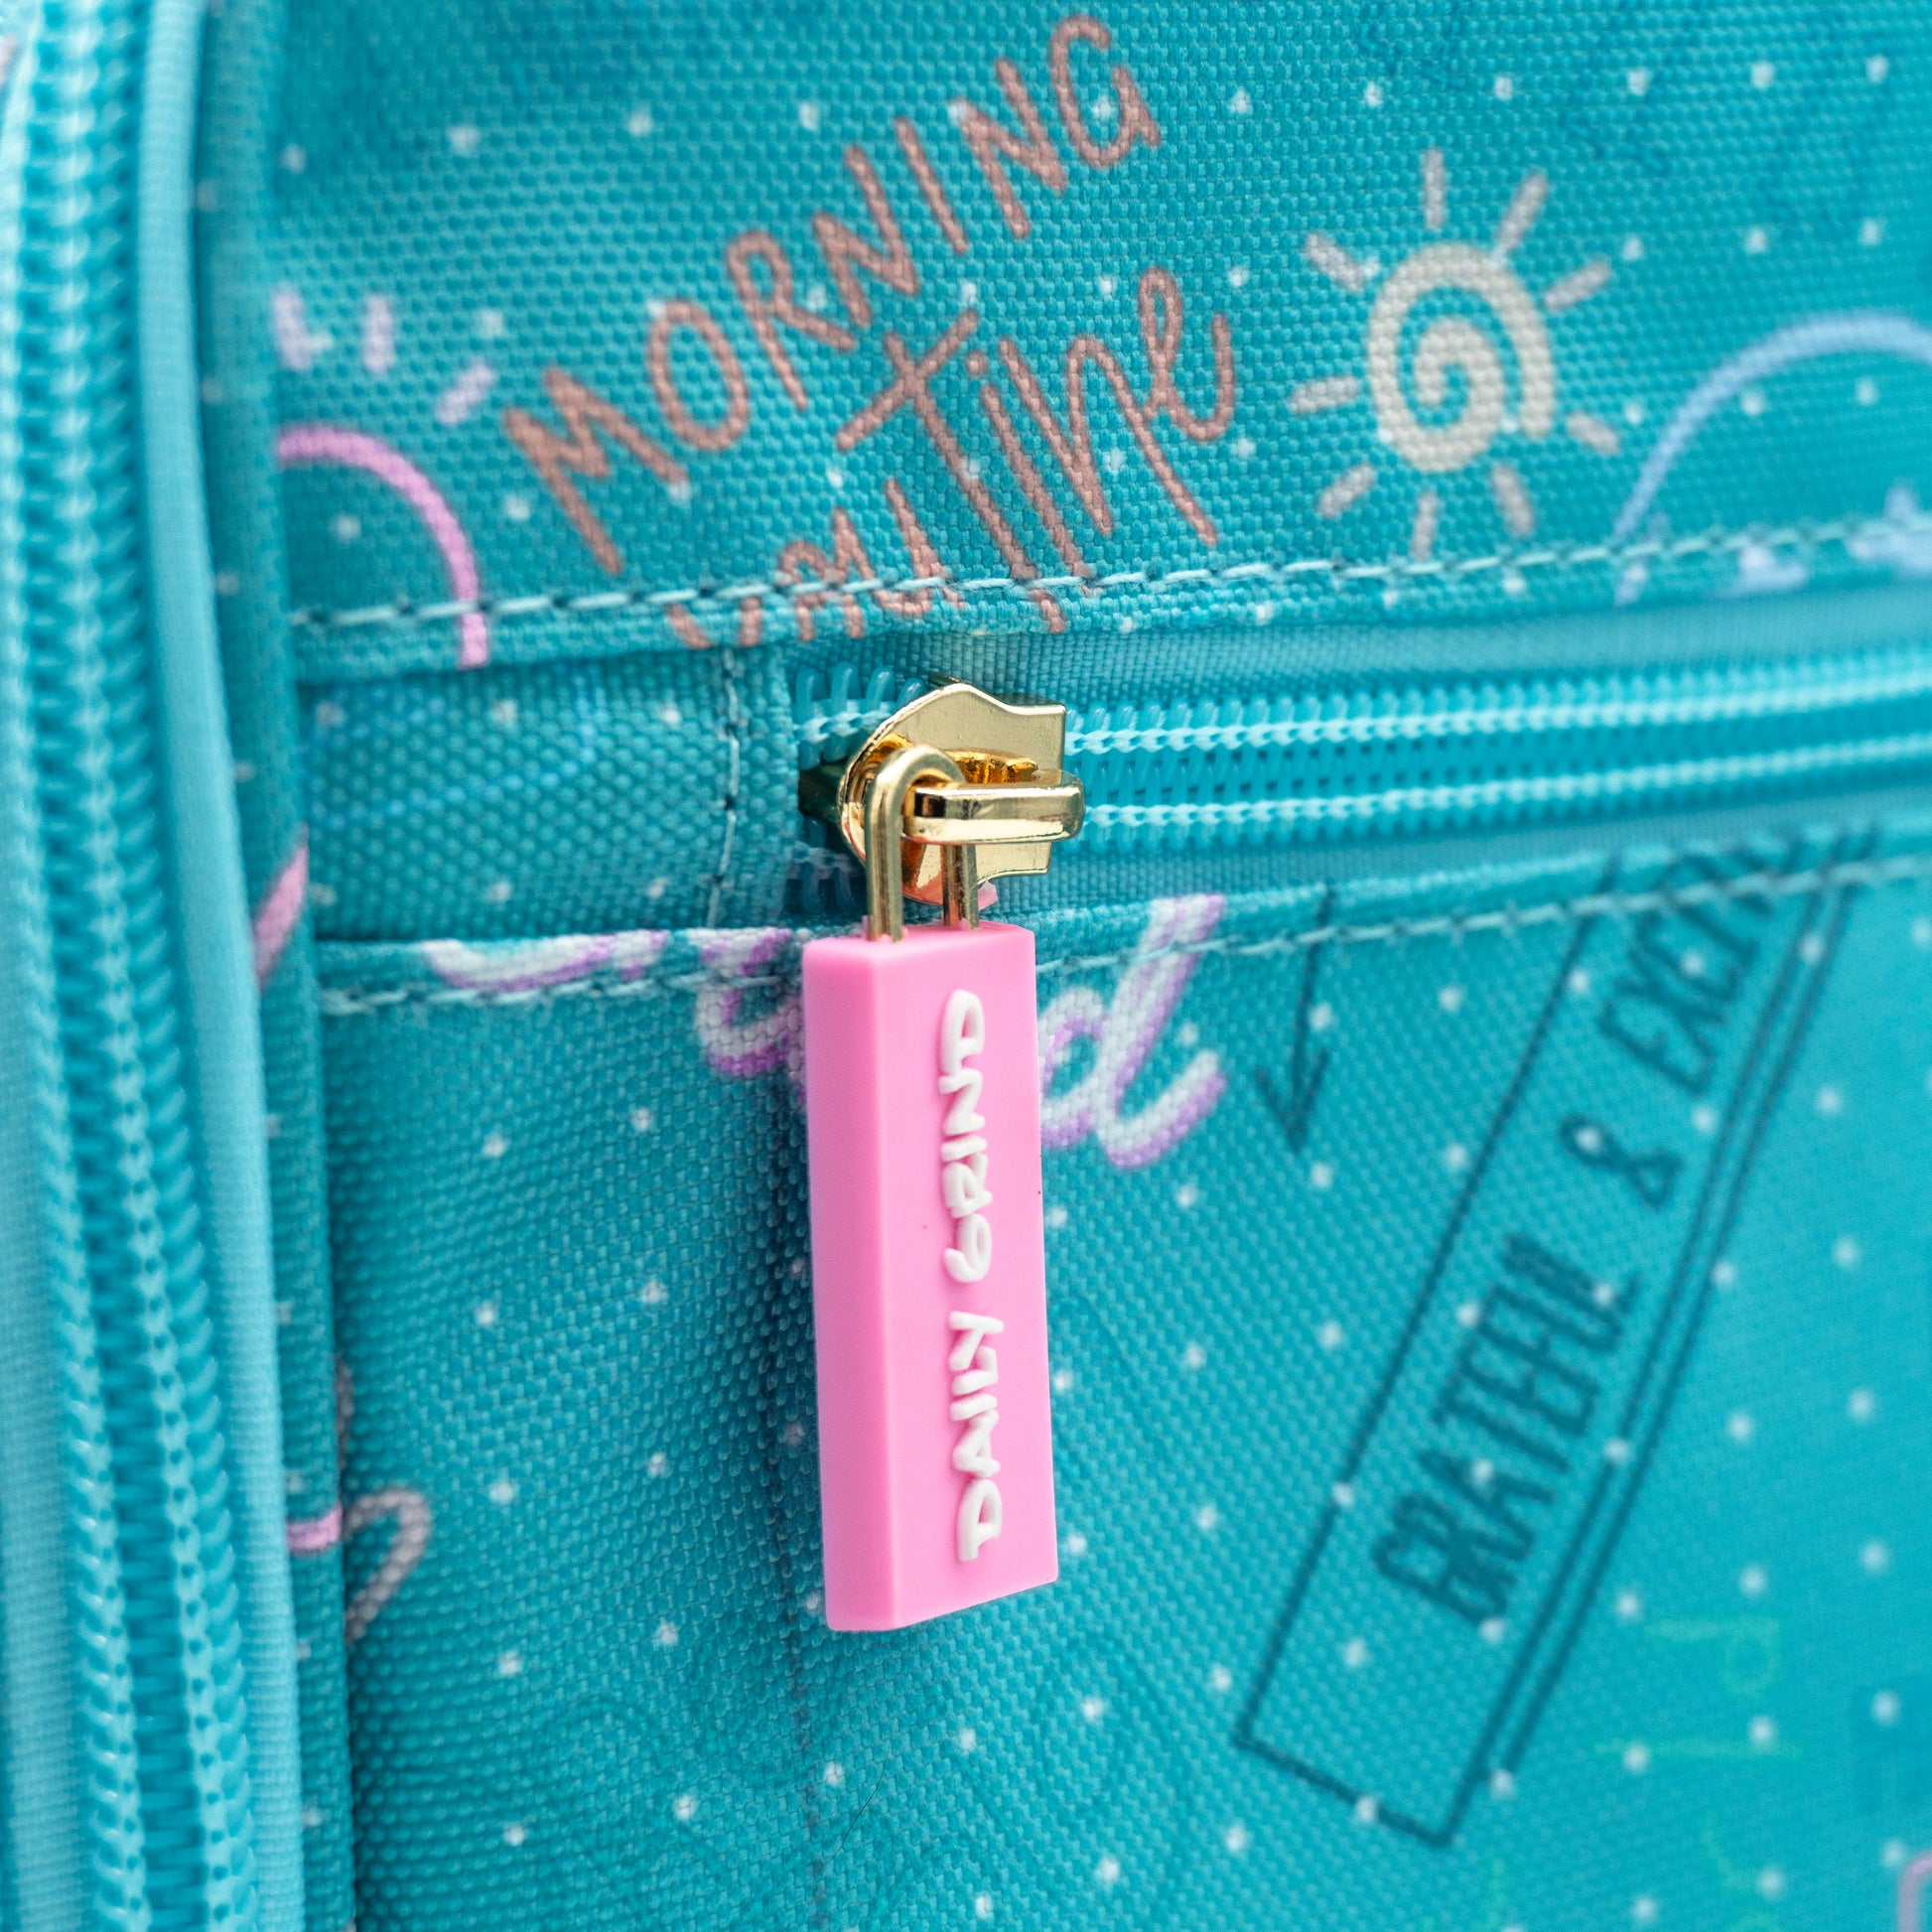 Close up of "Daily Grind" zipper pull